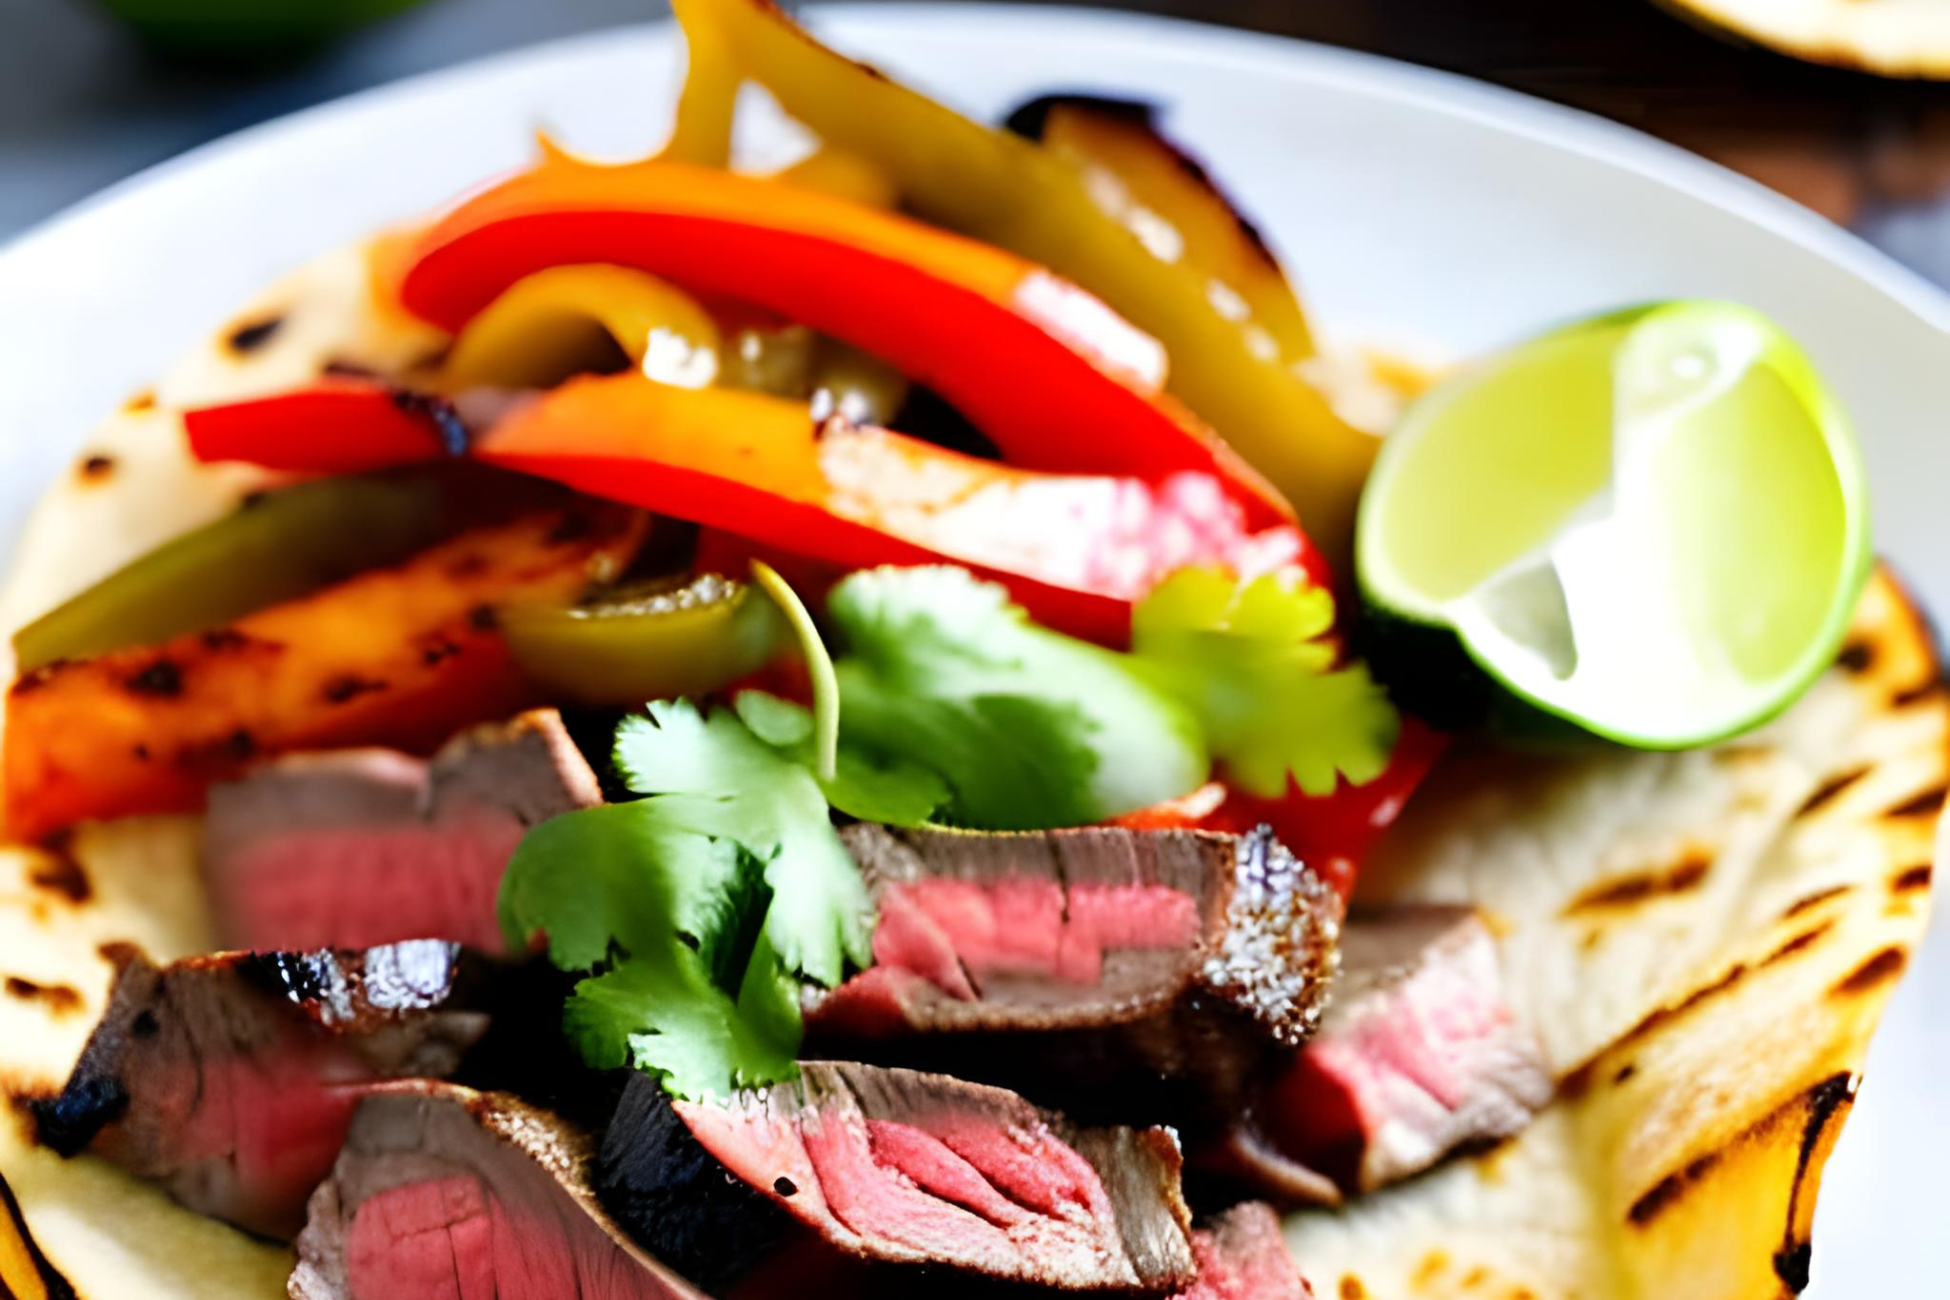 Grilled Steak Fajitas with Smoky Chipotle Marinade